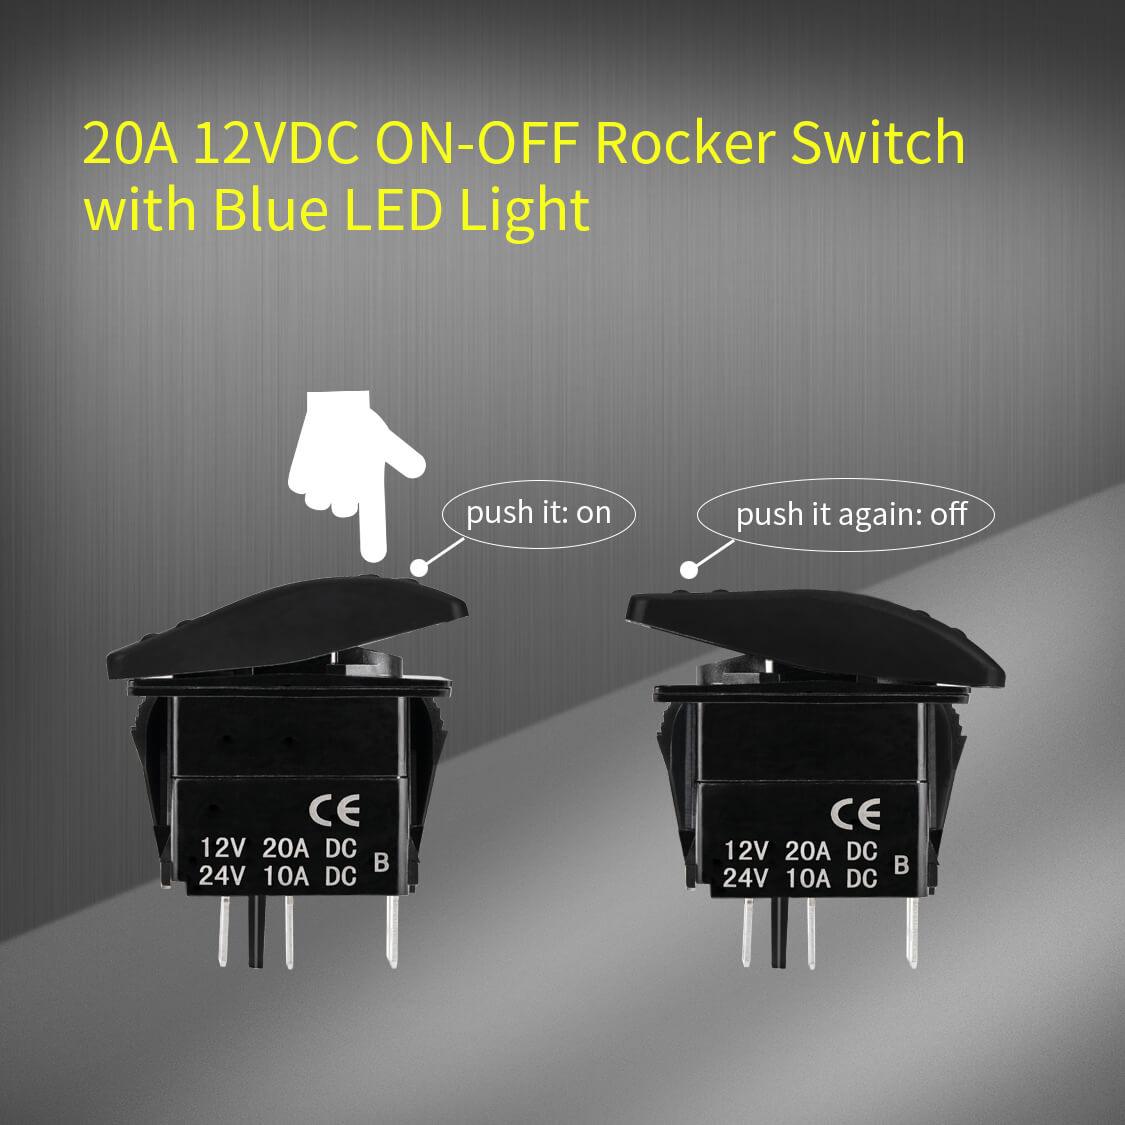 RV Boat 20A 12VDC Dual LED 5 Pin ON OFF Marine Rocker Switch best price